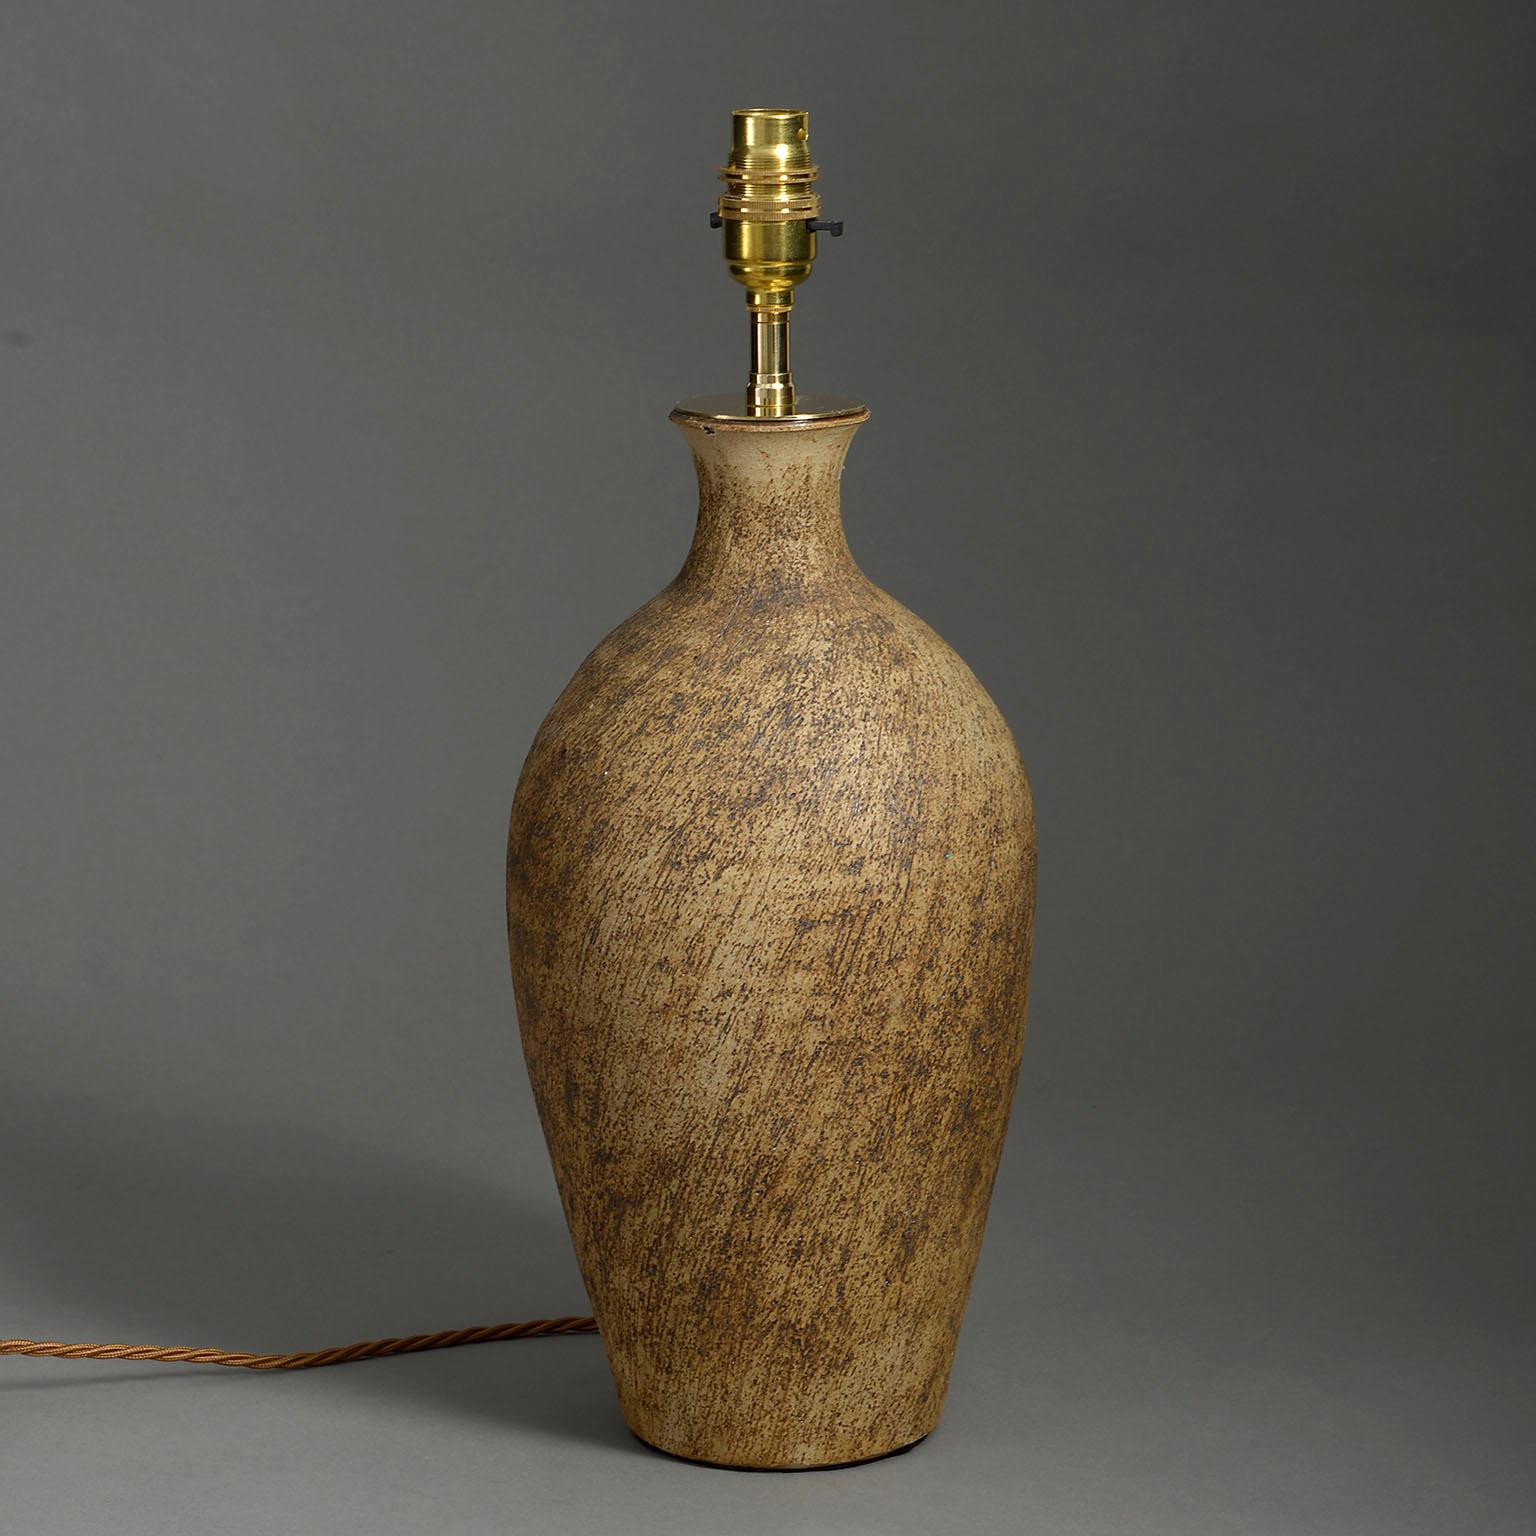 A mid-twentieth century terracotta bottle, with brushed surface, mounted as a lamp base.

Dimensions refer to ceramic part only.

Wired to UK standards. This lamp can be rewired to all international specifications inclusive of price